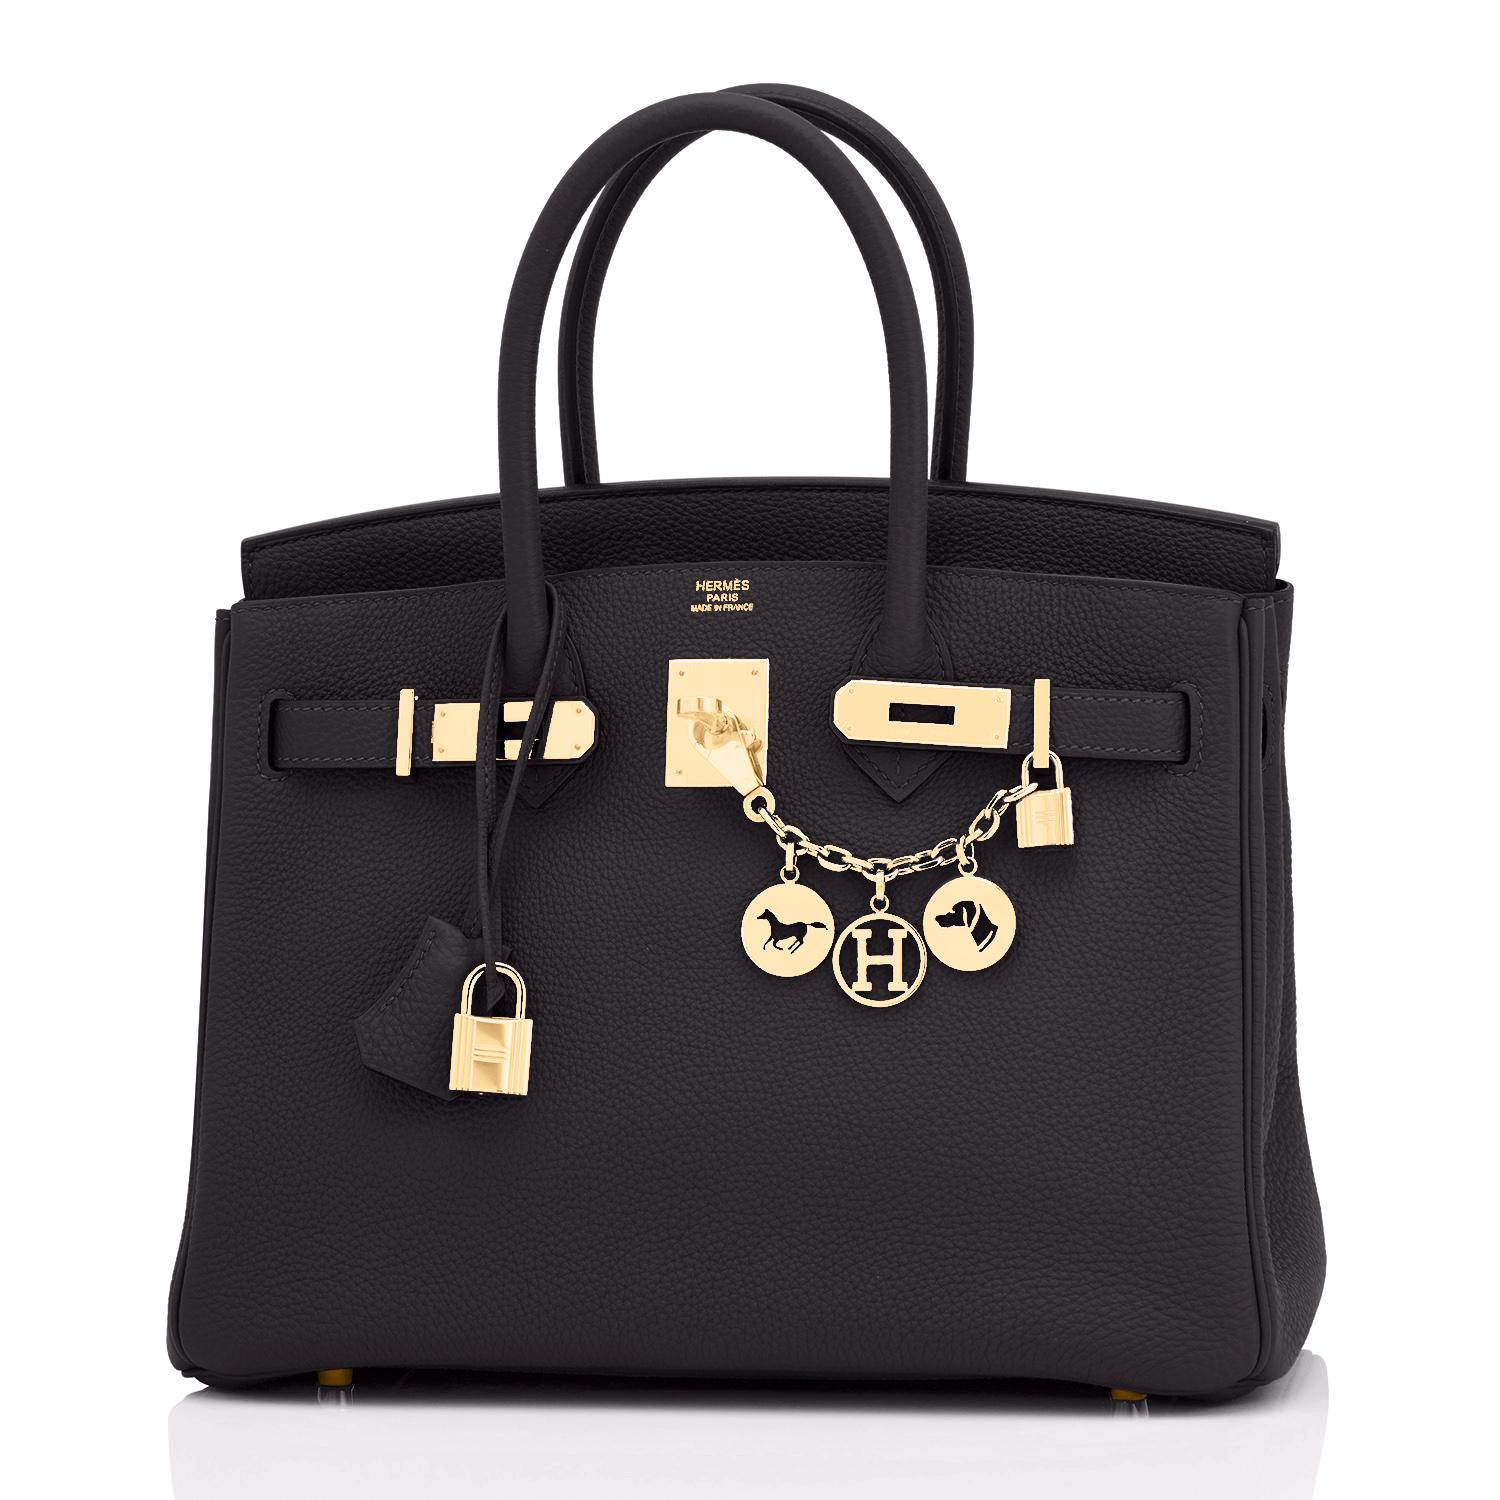 Chicjoy is pleased to present this Hermes Birkin 30cm Black Togo Gold Hardware Bag
Brand New in Box. Store Fresh. Pristine Condition (with plastic on hardware)
Just purchased from Hermes store; bag bears new 2022 interior U stamp! 
Perfect gift!